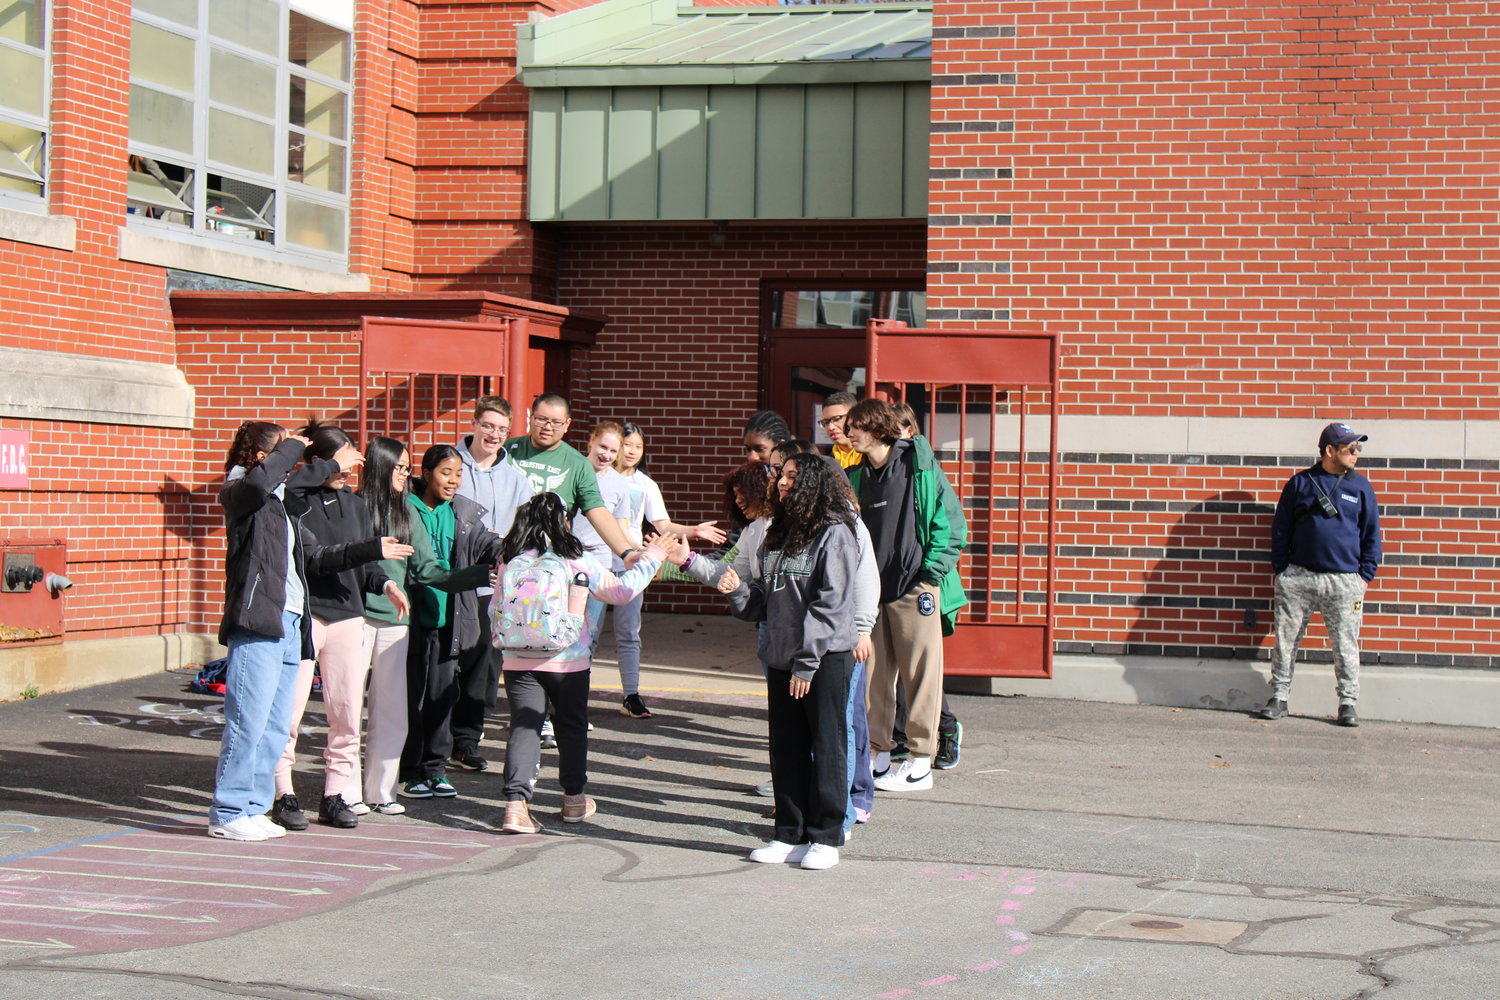 William Dutemple students are greeted by the boy’s and girl’s track teams from Cranston East as they get dropped off for school in the morning. (Photo by Ed Kdonian)